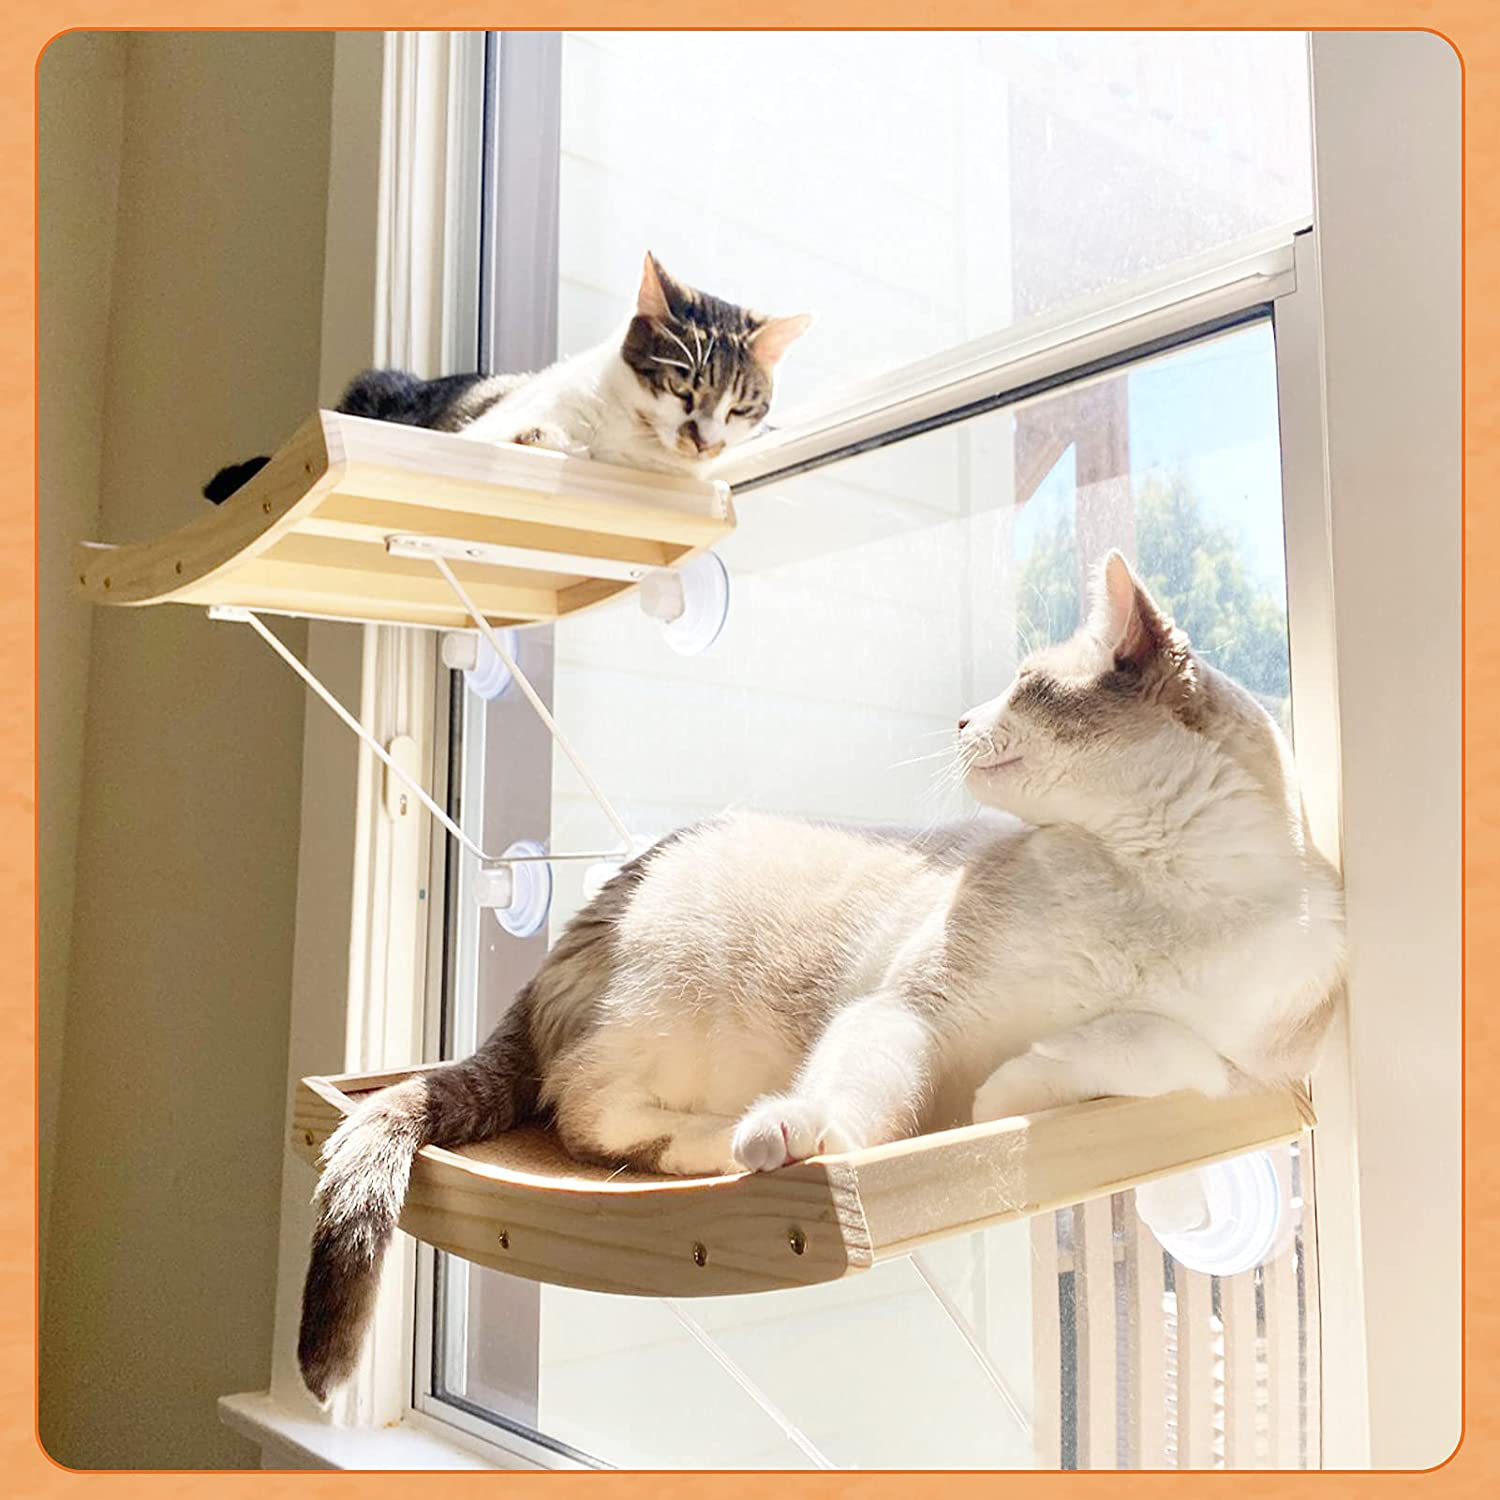 JOYO Cat Window Perch, Cat Hammock Window Seat with Strong Suction Cups, Window Mounted Cat Bed for Indoor Cats, Weighted up to 40Lb, Safety, Space Saving, Easy to Assemble